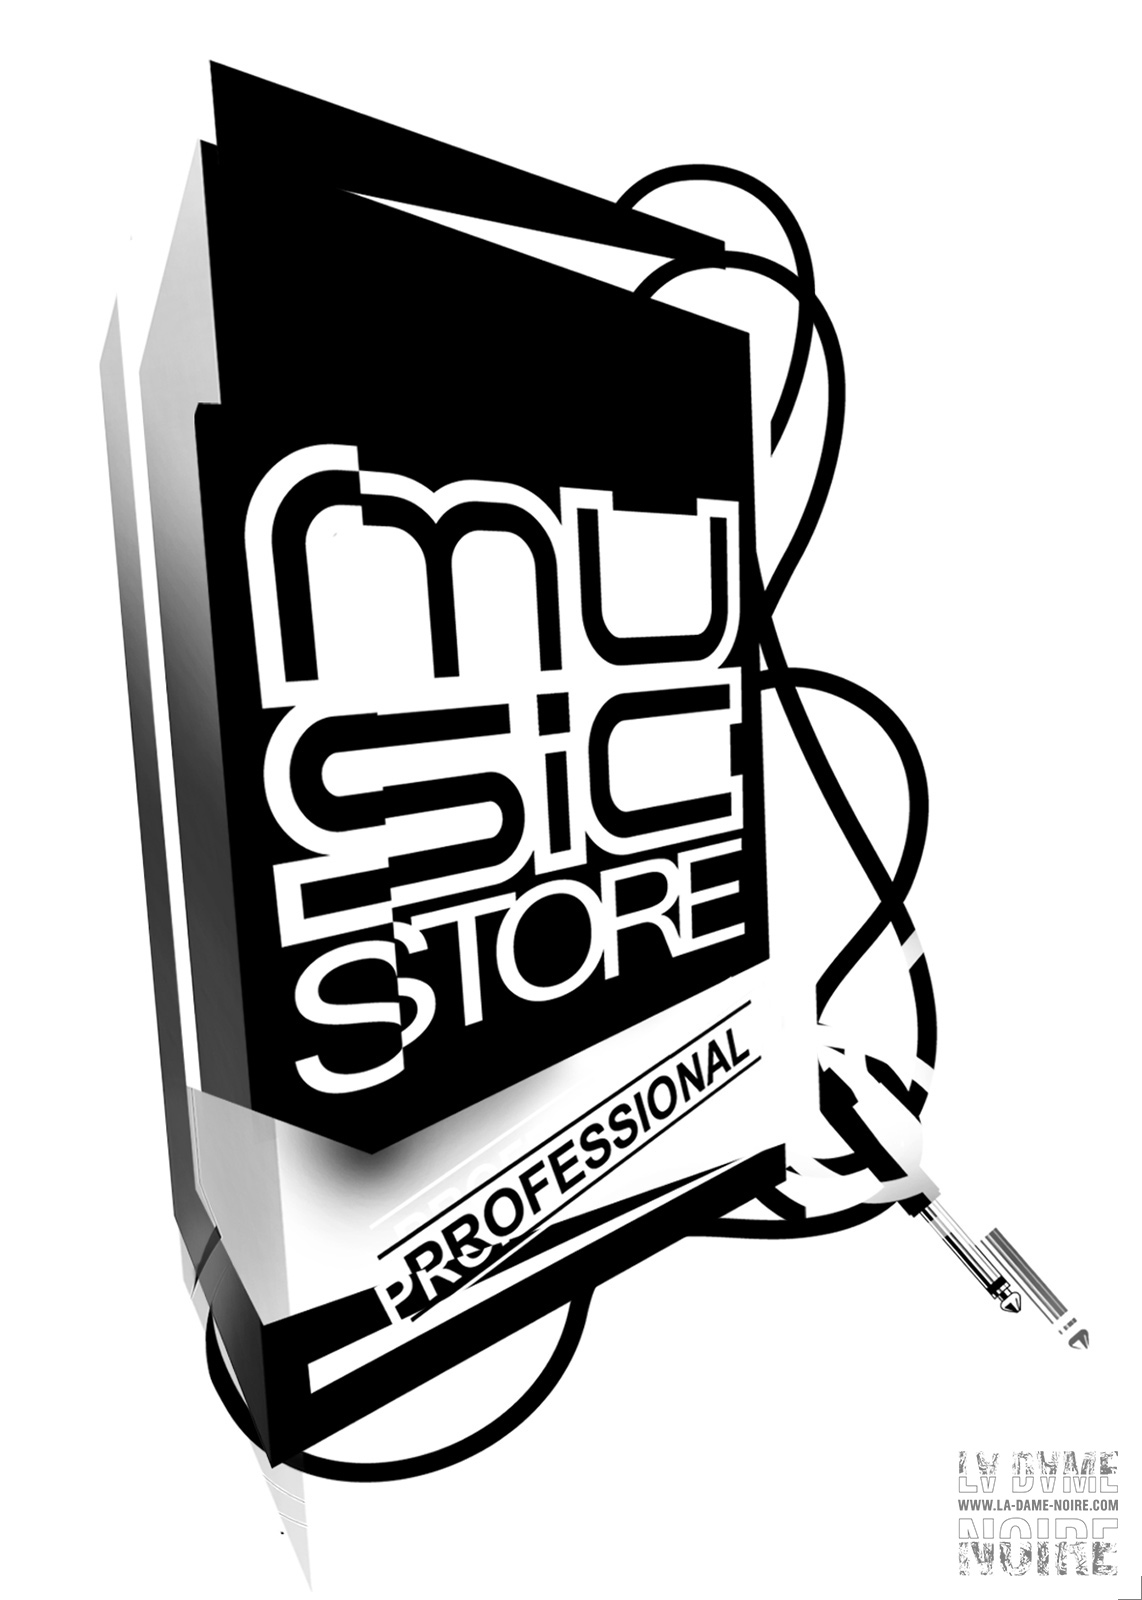 Re-make of Musicstore's logo in black and with